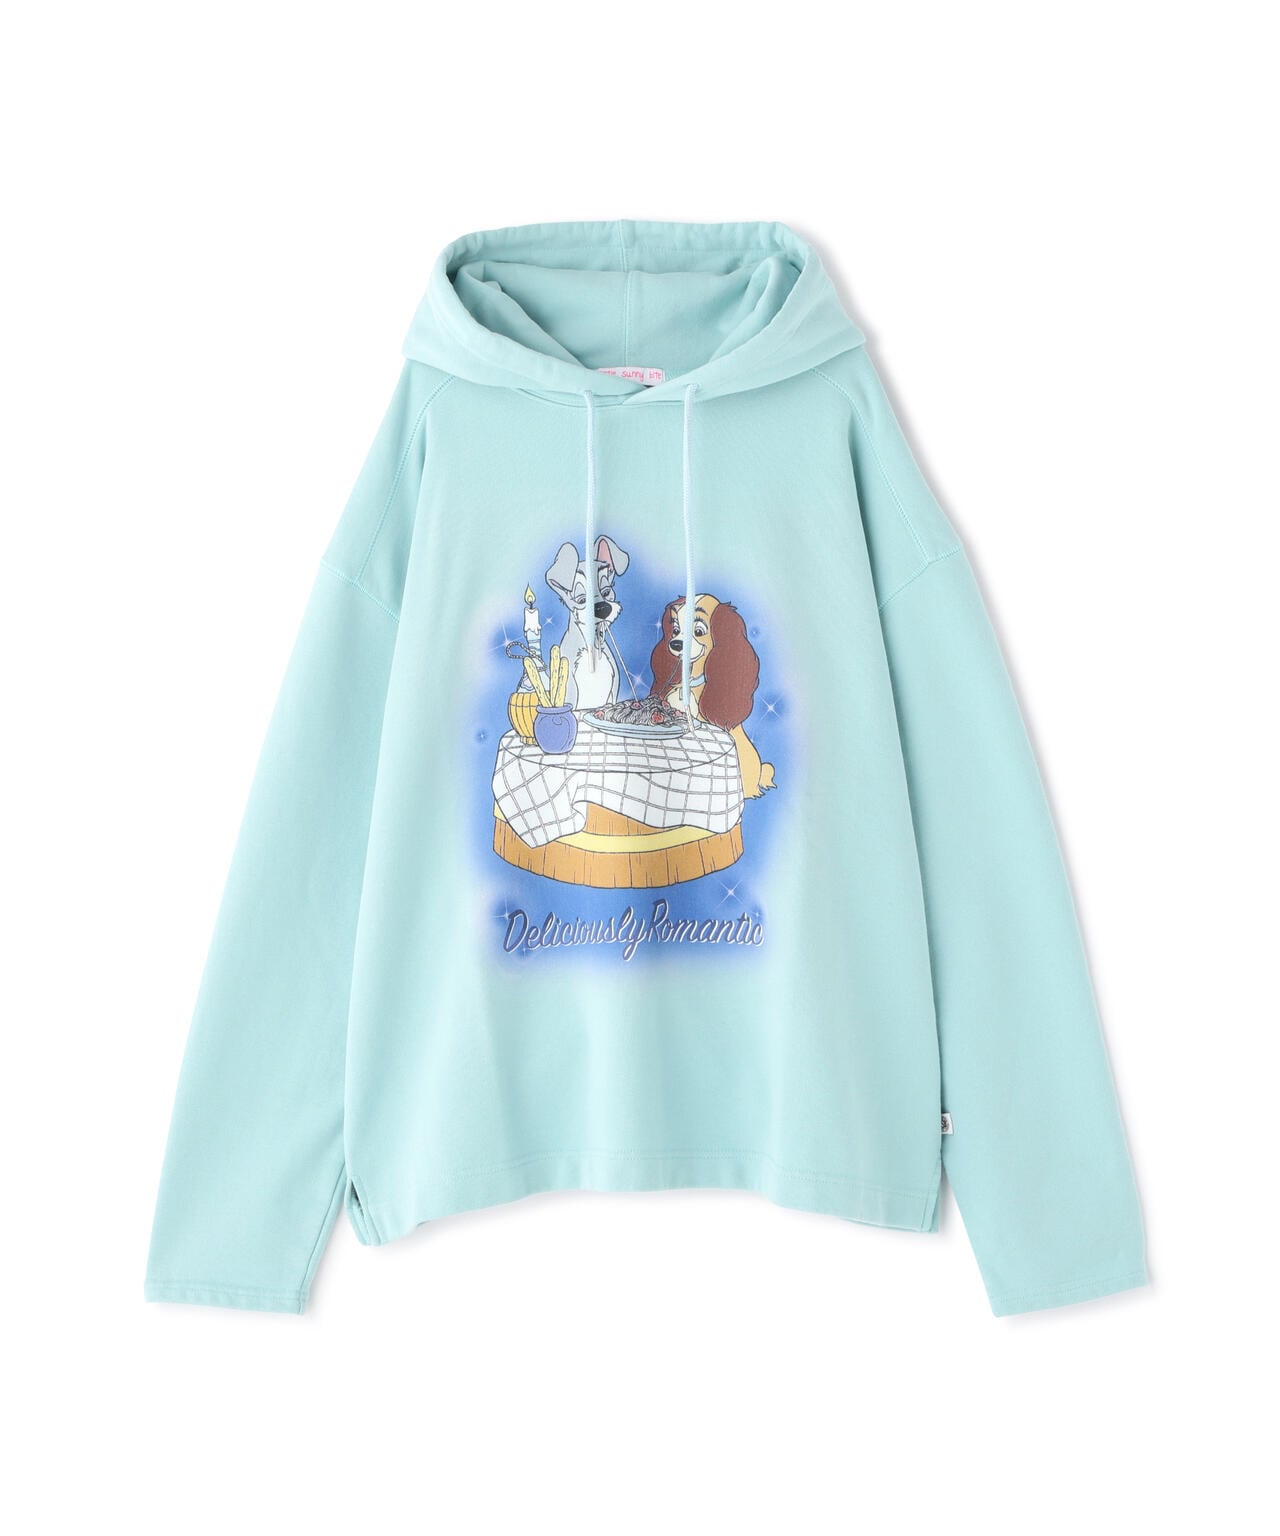 LittleSunnyBite/リトルサニーバイト/Lady and the Tramp hoodie | LHP